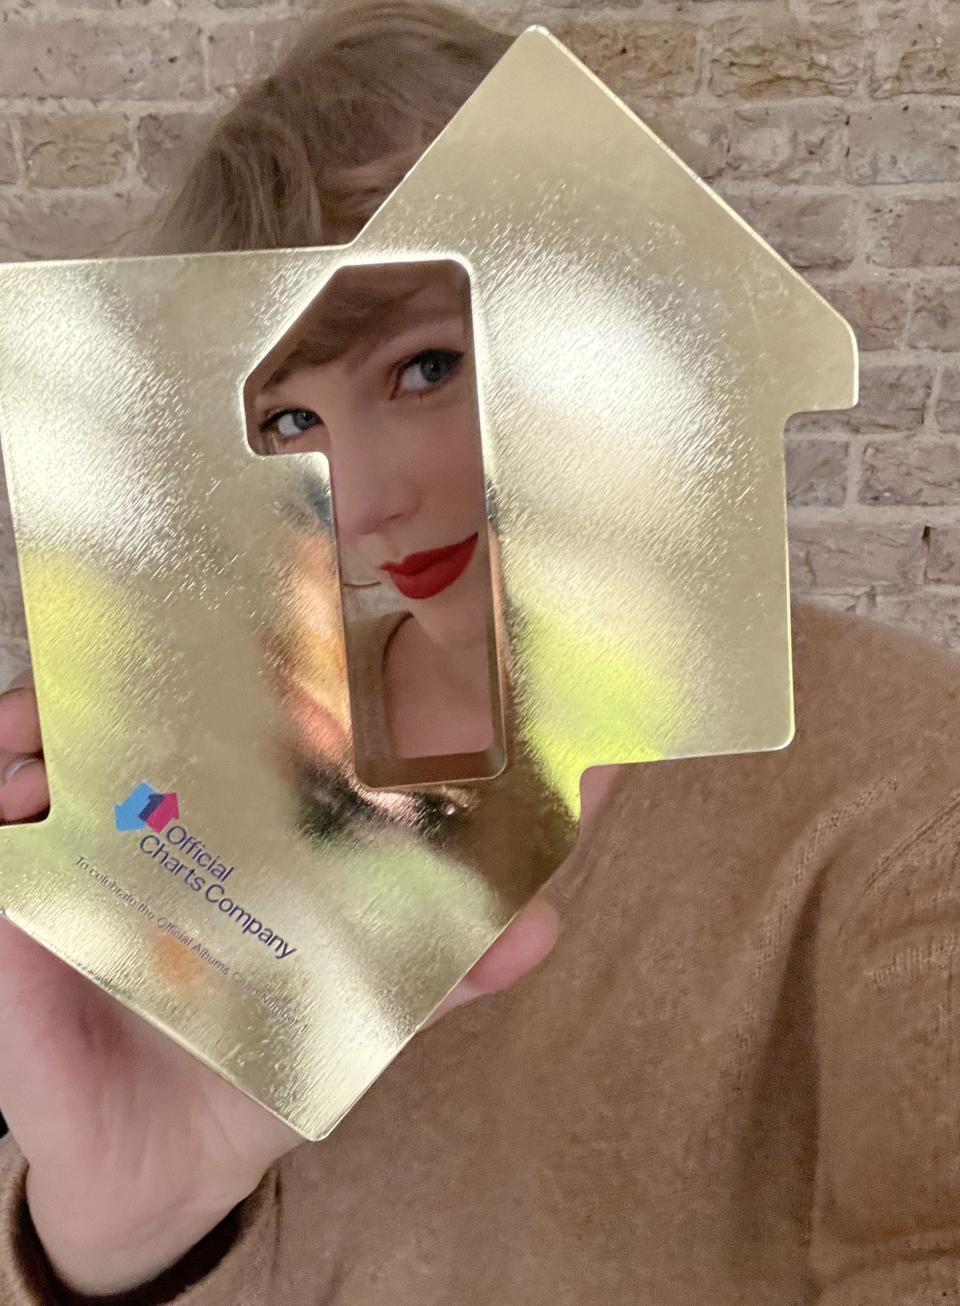 Taylor Swift has topped the UK album chart (Official Charts Company)